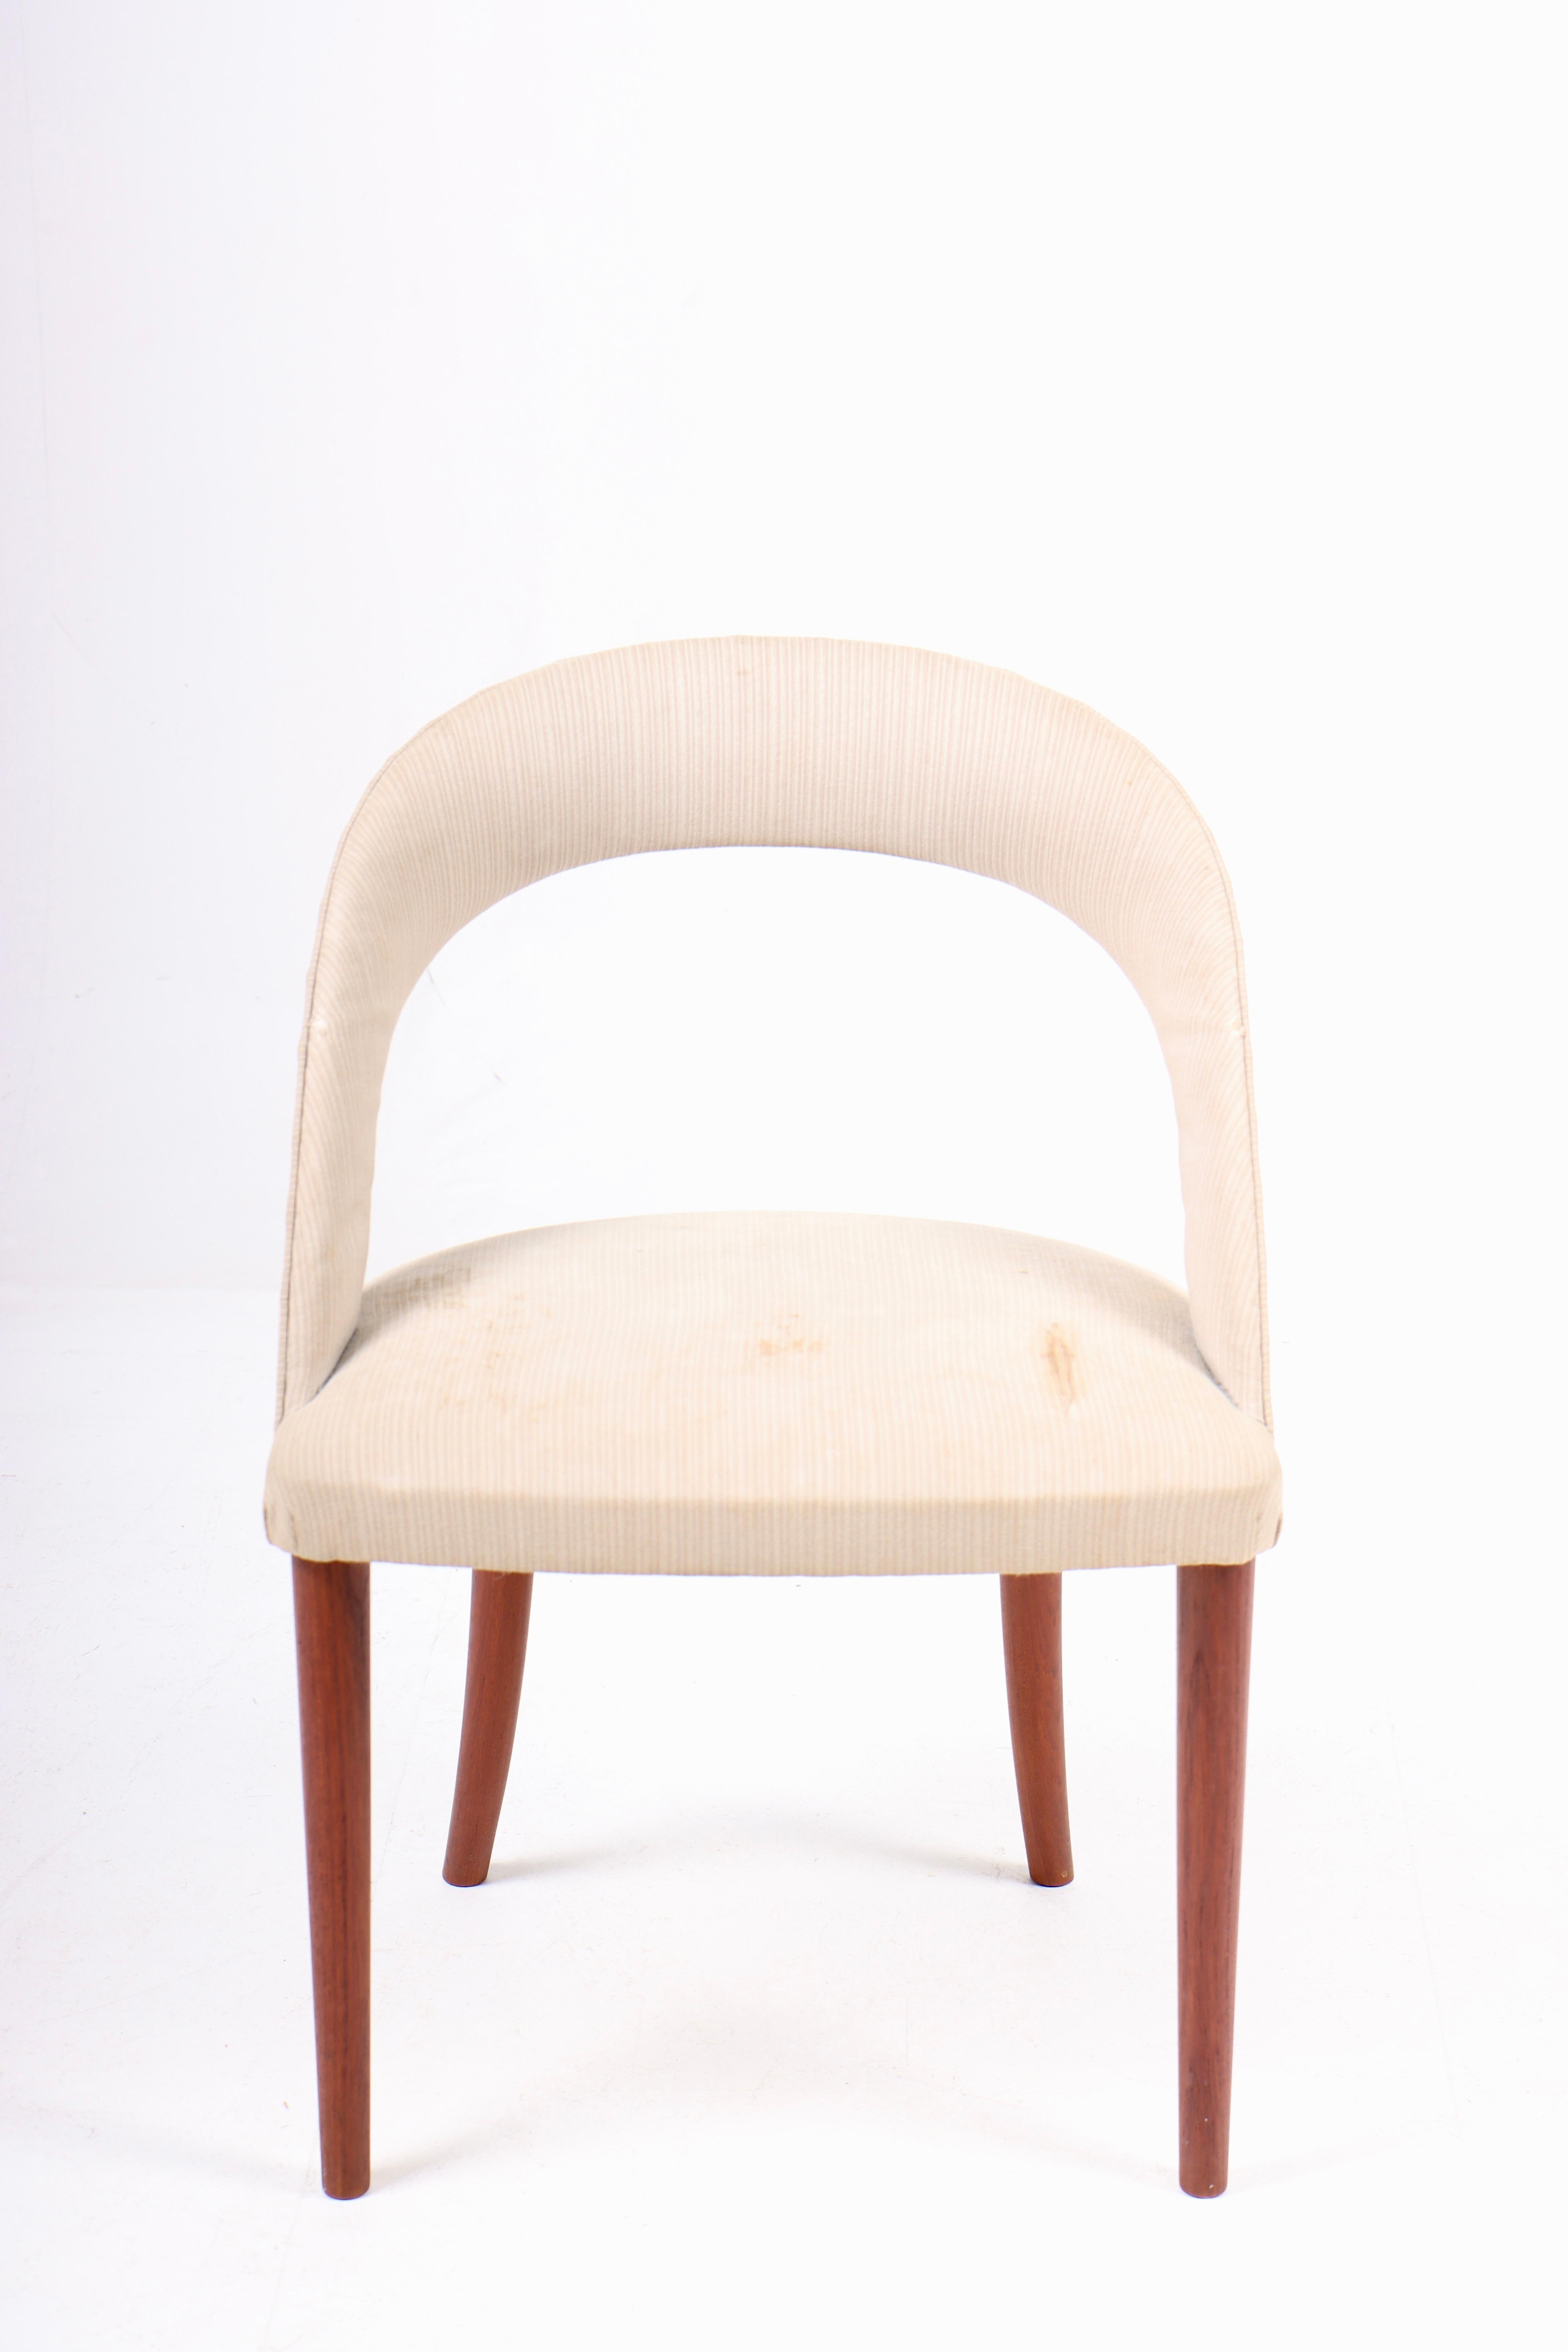 Side chair in fabric, designed by Frode Holm. Made in Denmark, original condition.